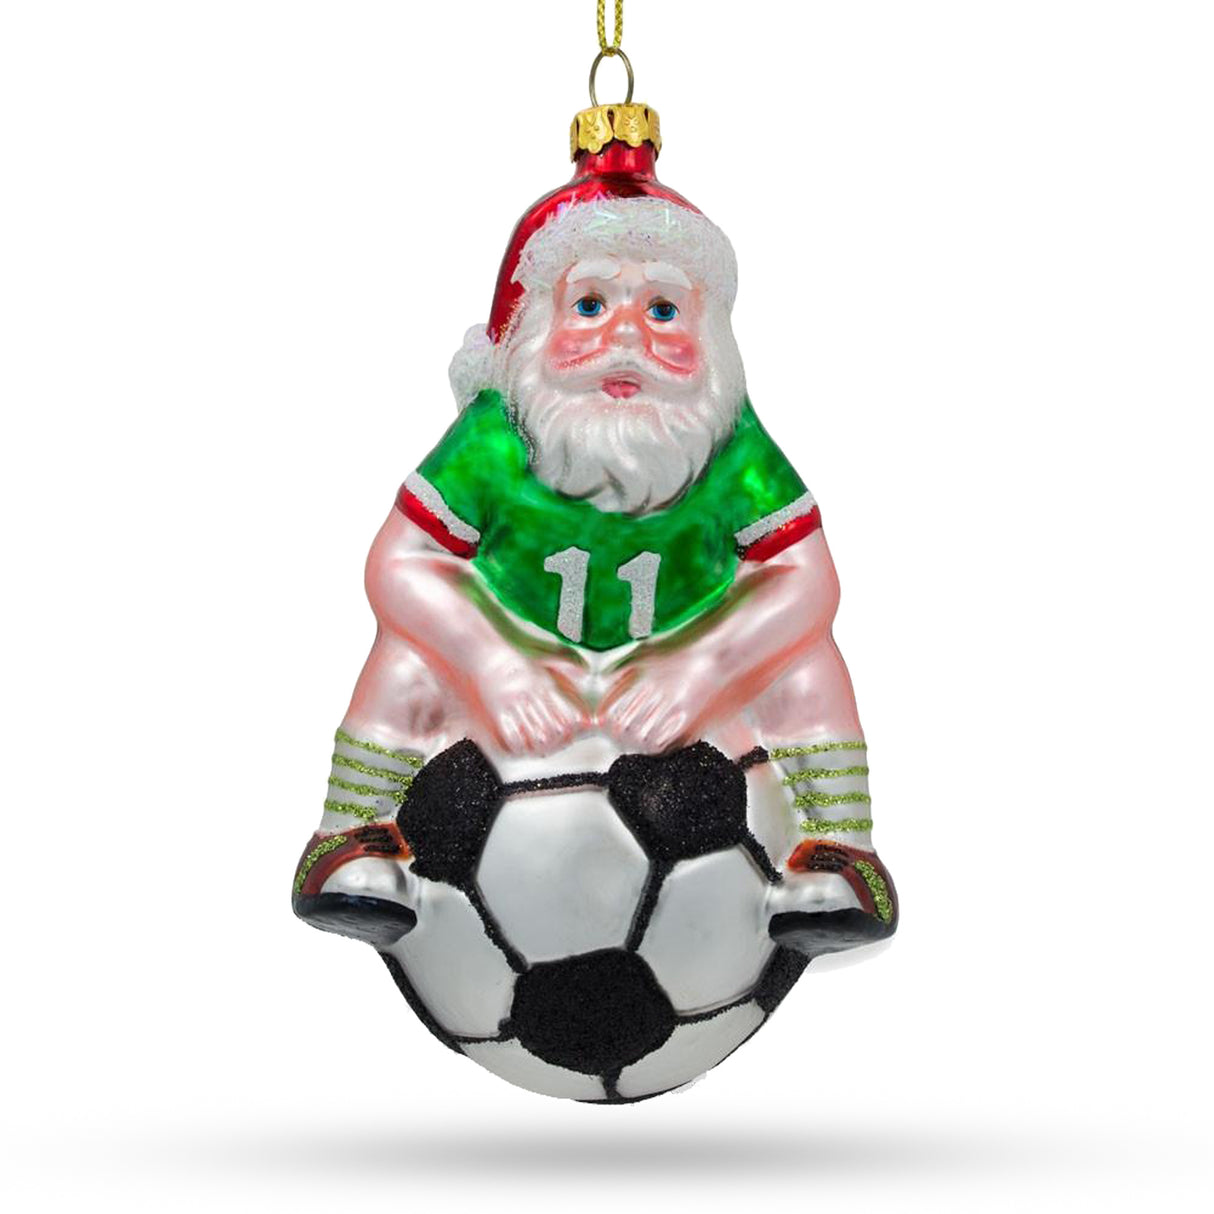 Glass Festive Santa Seated on Soccer Ball - Blown Glass Christmas Ornament in Multi color